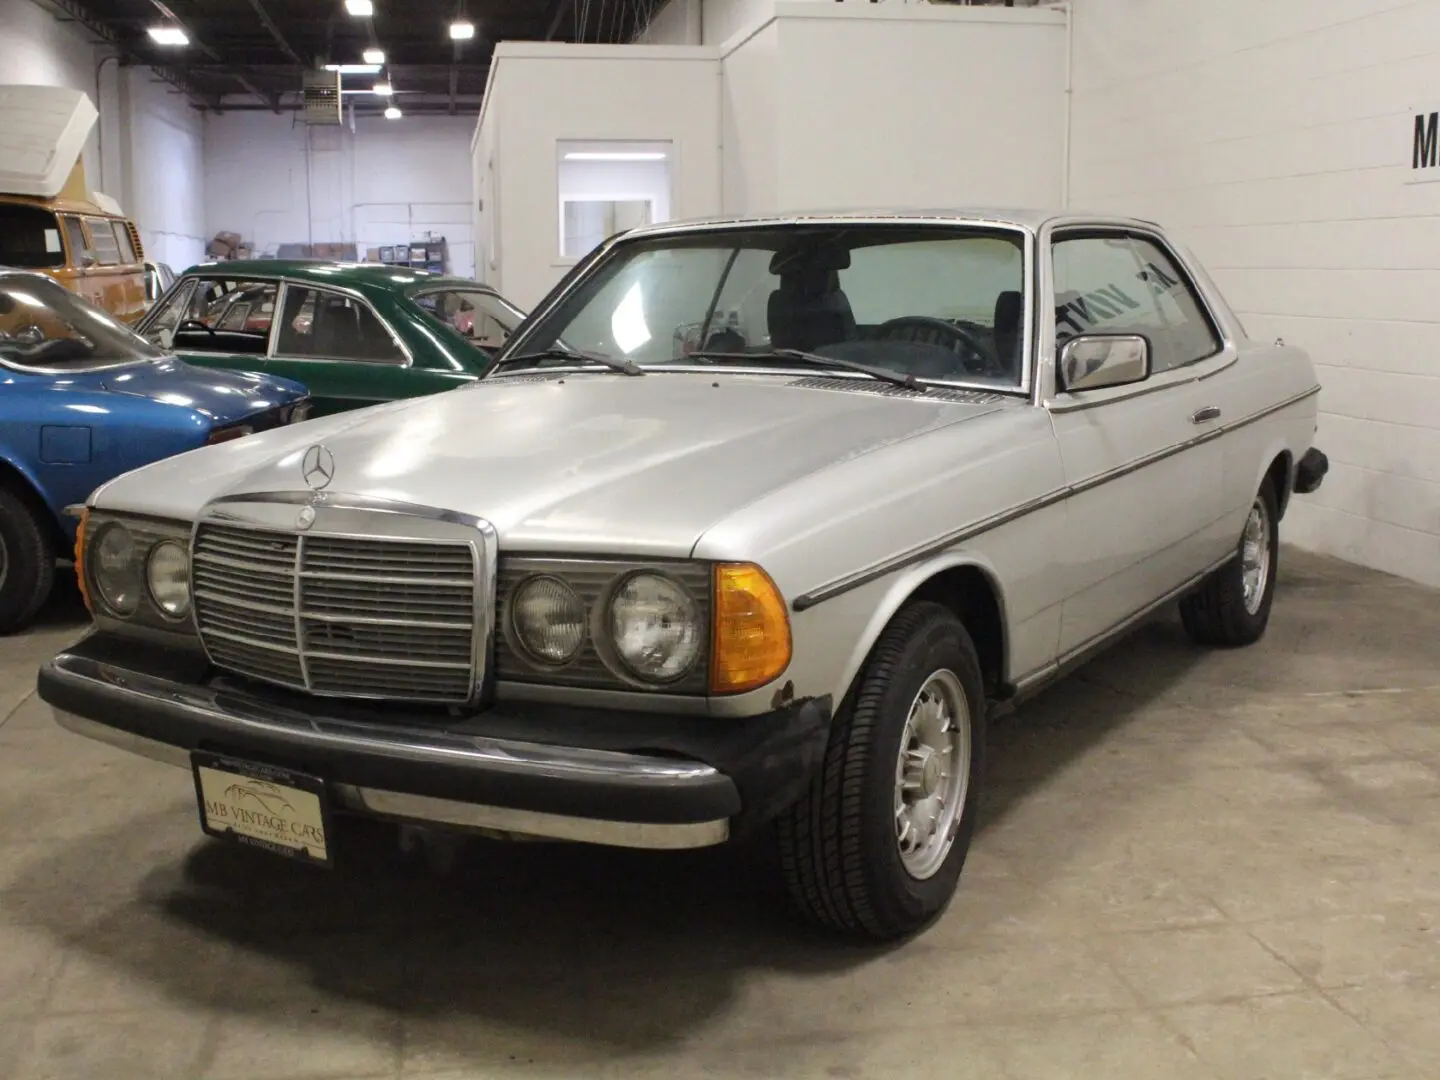 1979 Mercedes 300CD Sunroof Coupe